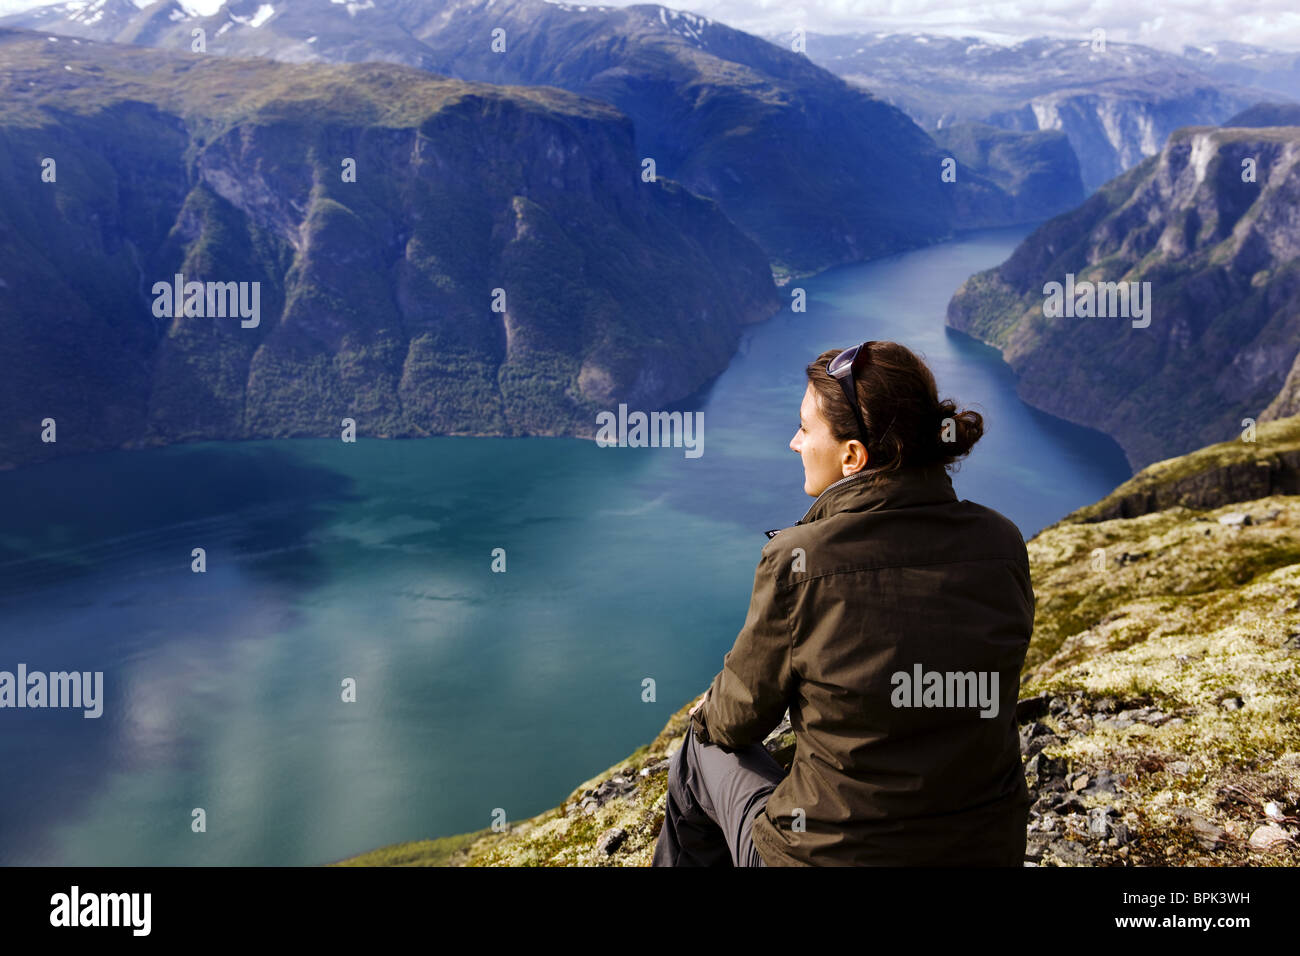 Young woman looking at the Aurlandsfjord, Prest, Aurland, Sogn og Fjordane, Norway, Scandinavia, Europe Stock Photo